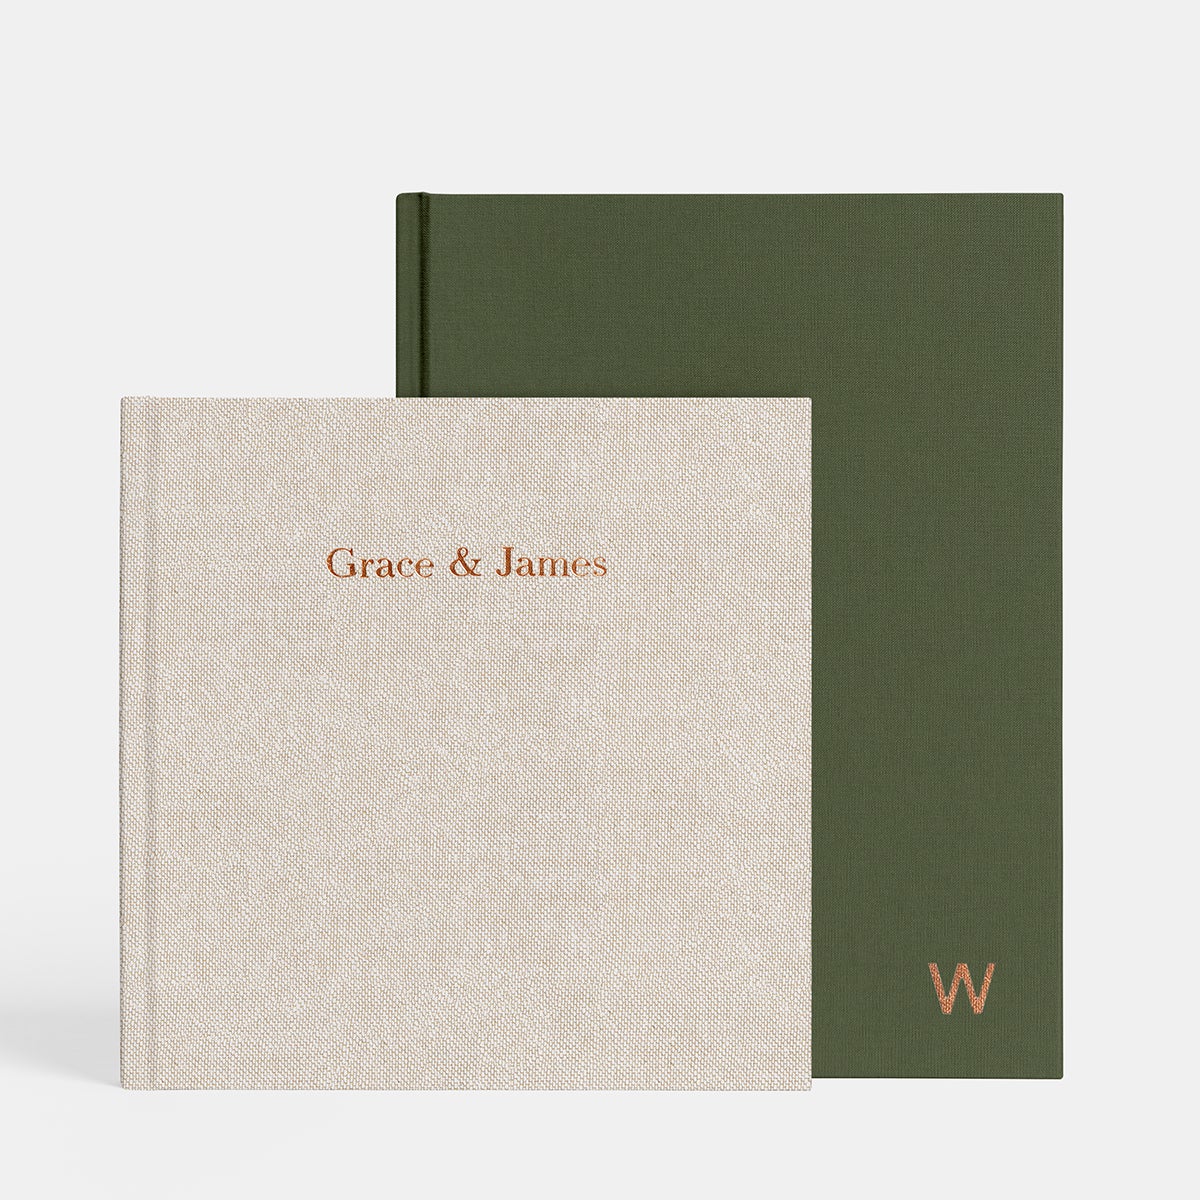 Oatmeal layflat album titled Grace and James stacked in front of olive layflat, both featuring copper foil